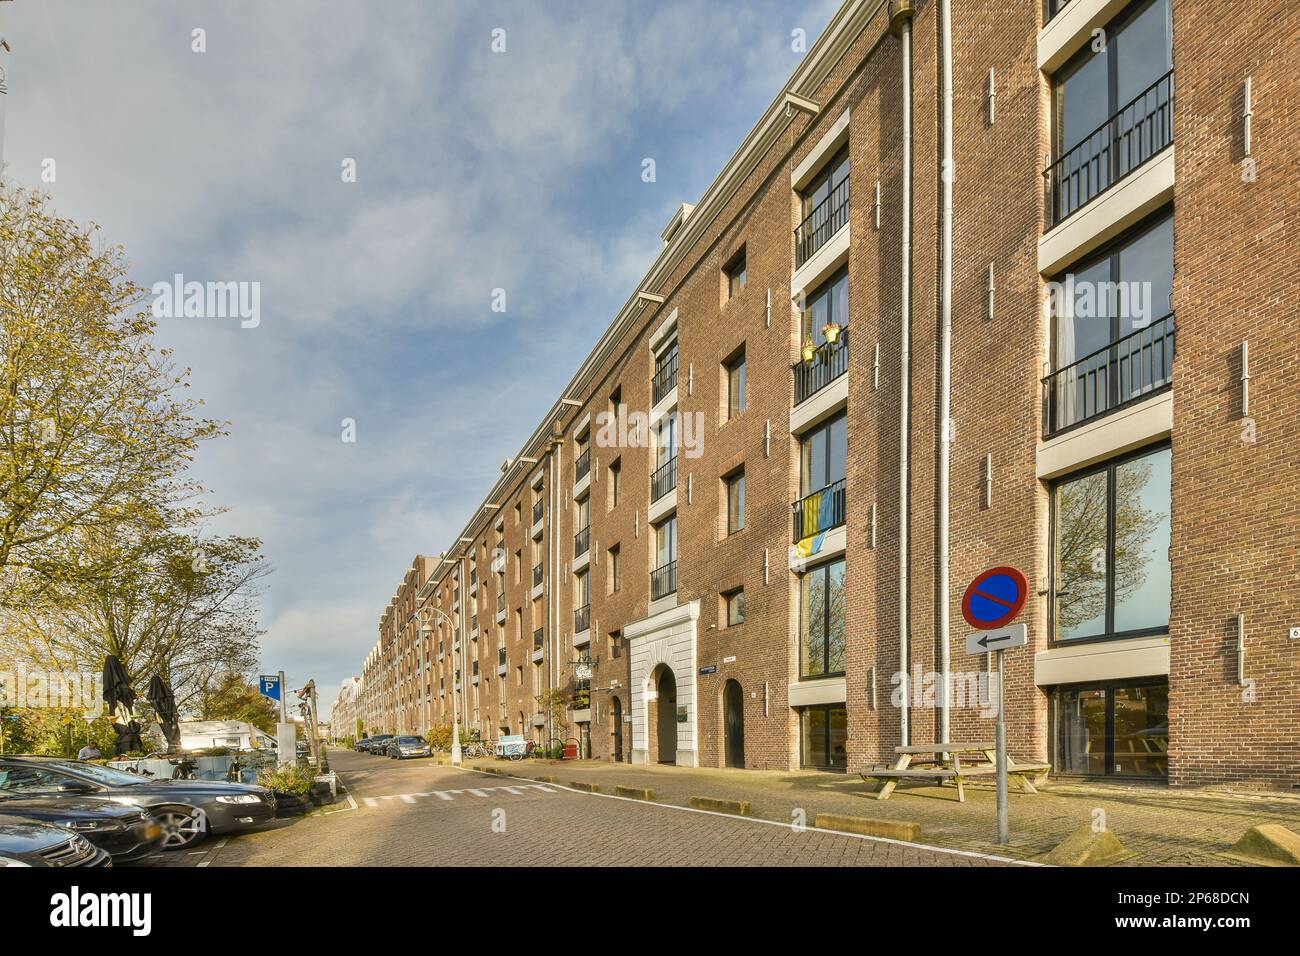 Amsterdam, Netherlands - 10 April, 2021: a brick building with cars parked in the street next to it and a stop sign on the side of the road Stock Photo